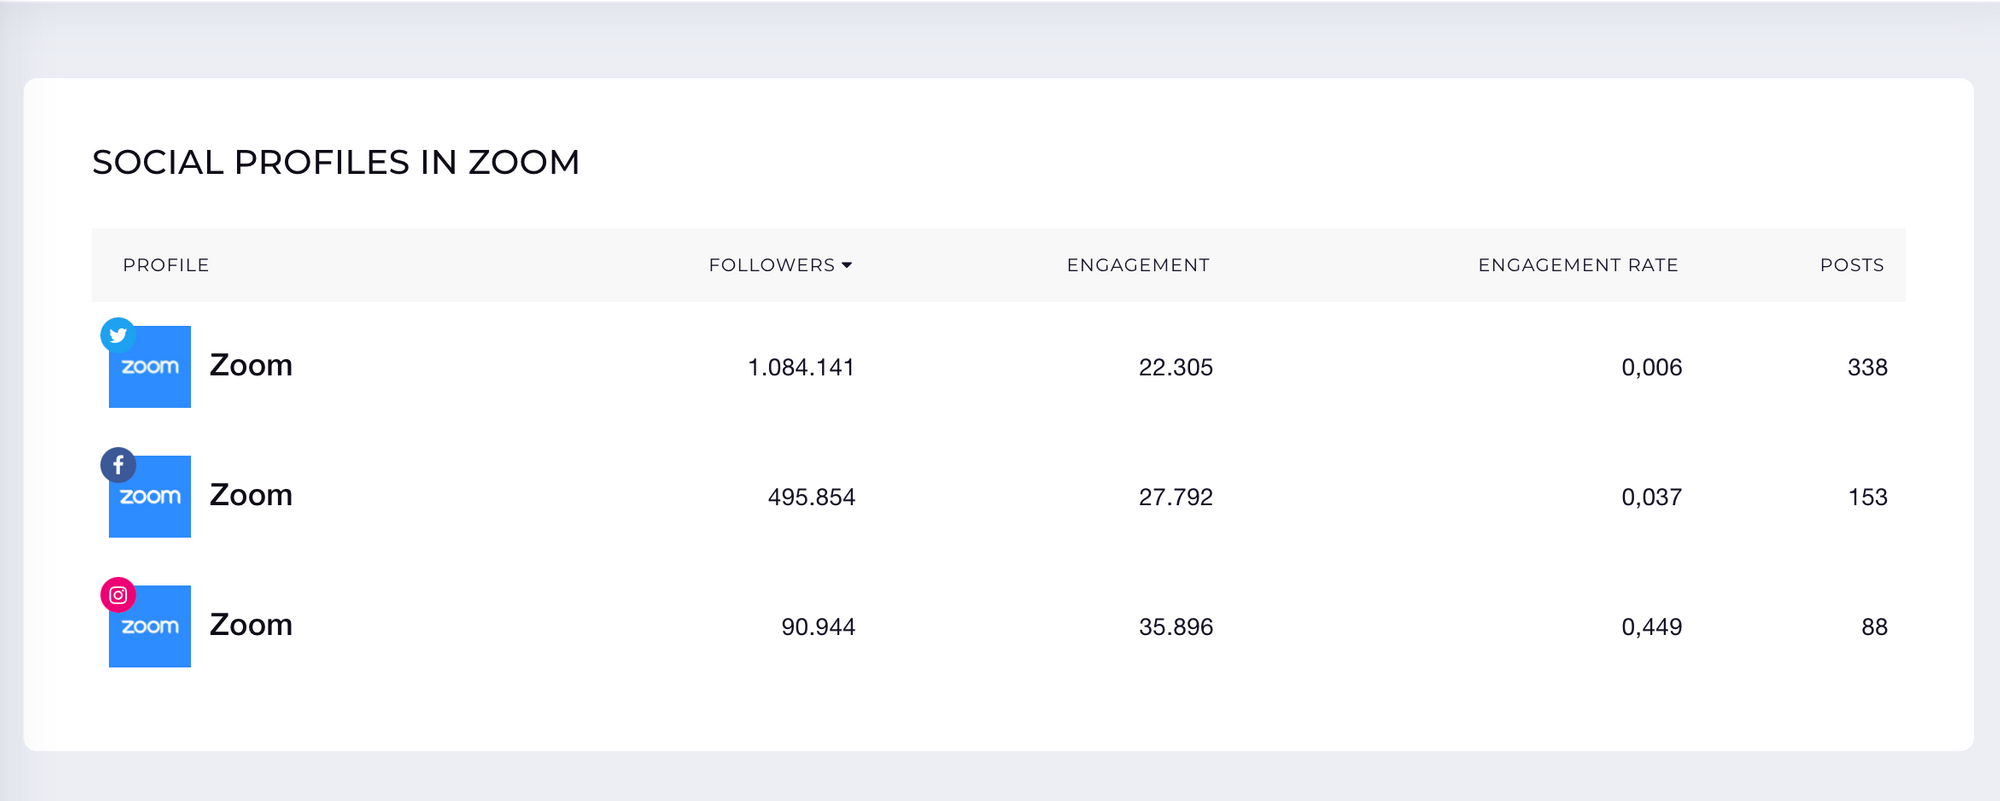 This is an overview of the performance of Zoom's social media accounts.